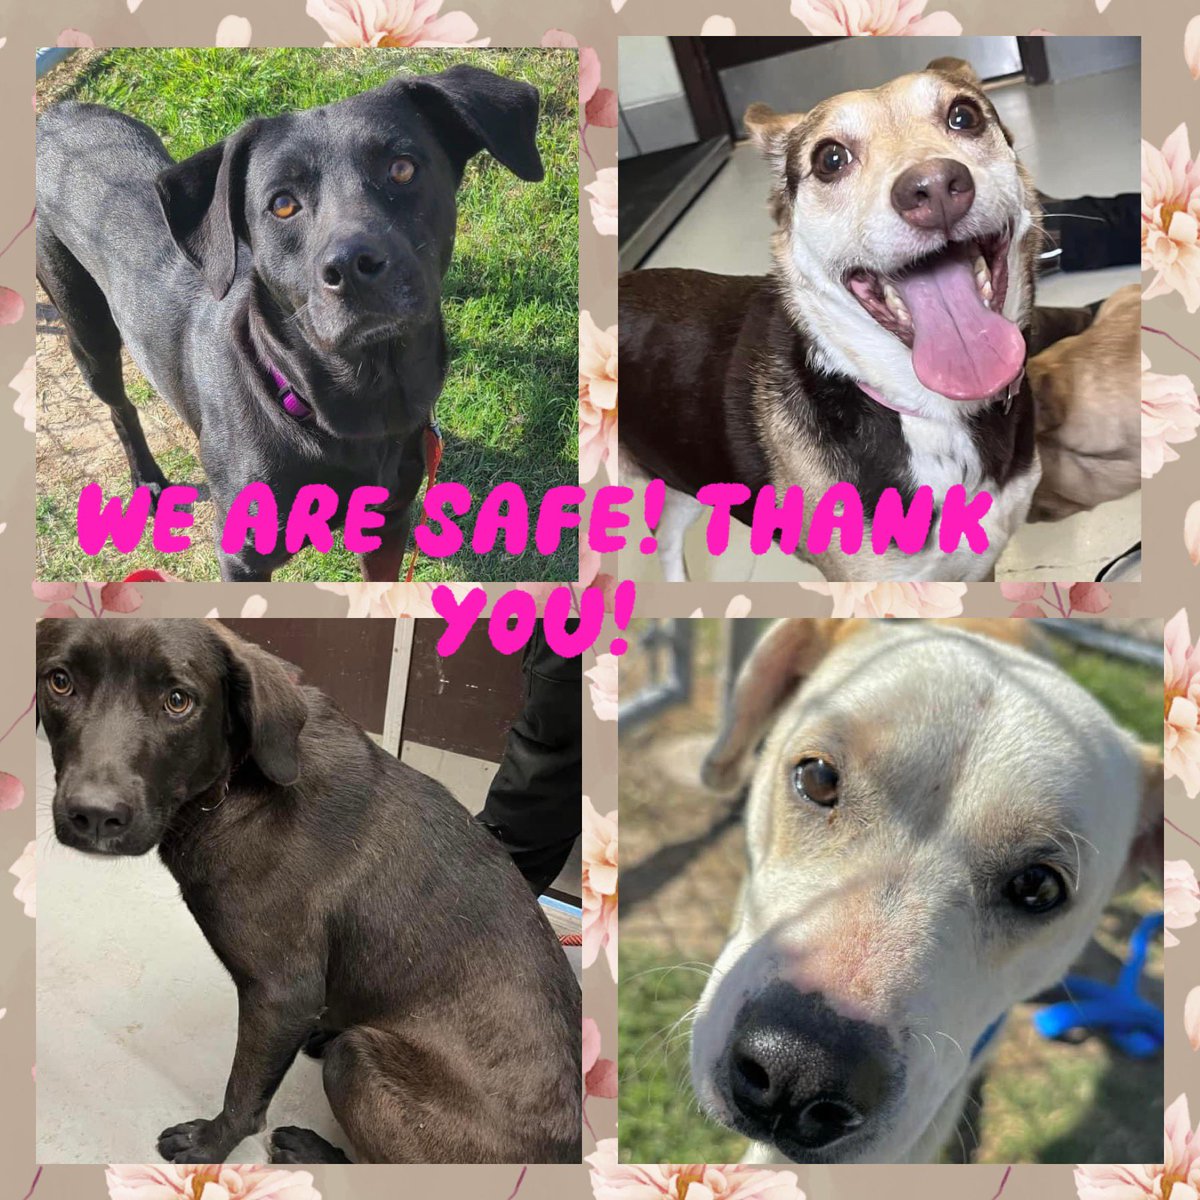 🎉🎉🎉🎉🎉🎉🎉🎉🎉🎉
All our four pups are safe!!!!
TYSVM to y’all that didn’t give up for saving them and of course to the rescuers ❤️❤️❤️❤️❤️
MARX, WILLOW, BRANDI, NIKKI
will have new lives thanks to YOU! #Rescuevillage and #Rescues YOU ROCK!!
❤️🐾❤️🐾❤️🐾❤️🐾❤️c